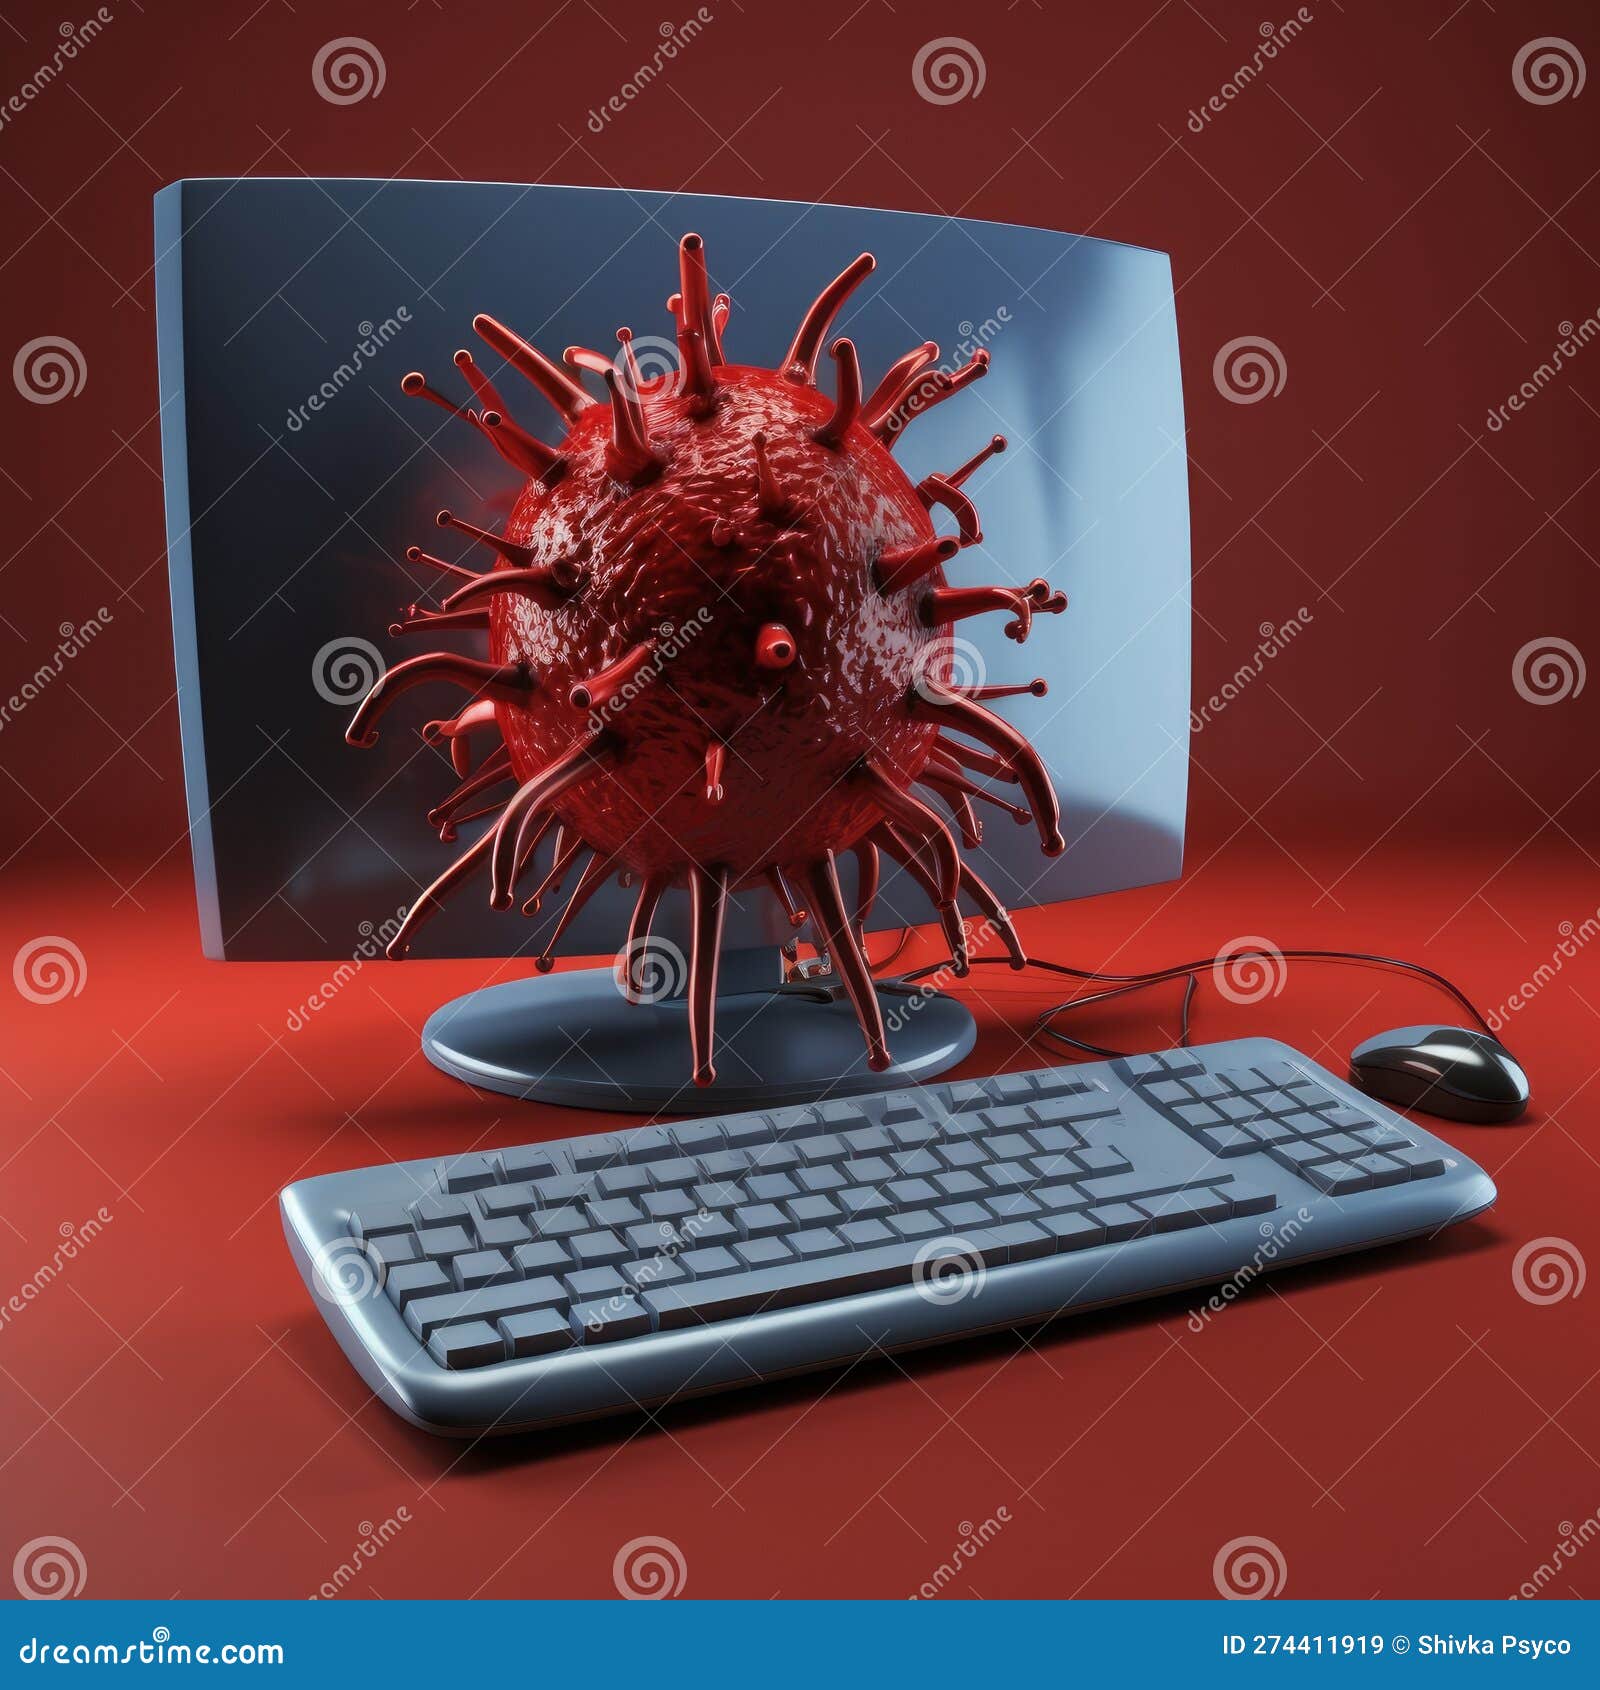 Computer Viruses, Worms, and Trojans: What are They? - 2023 Guide ...